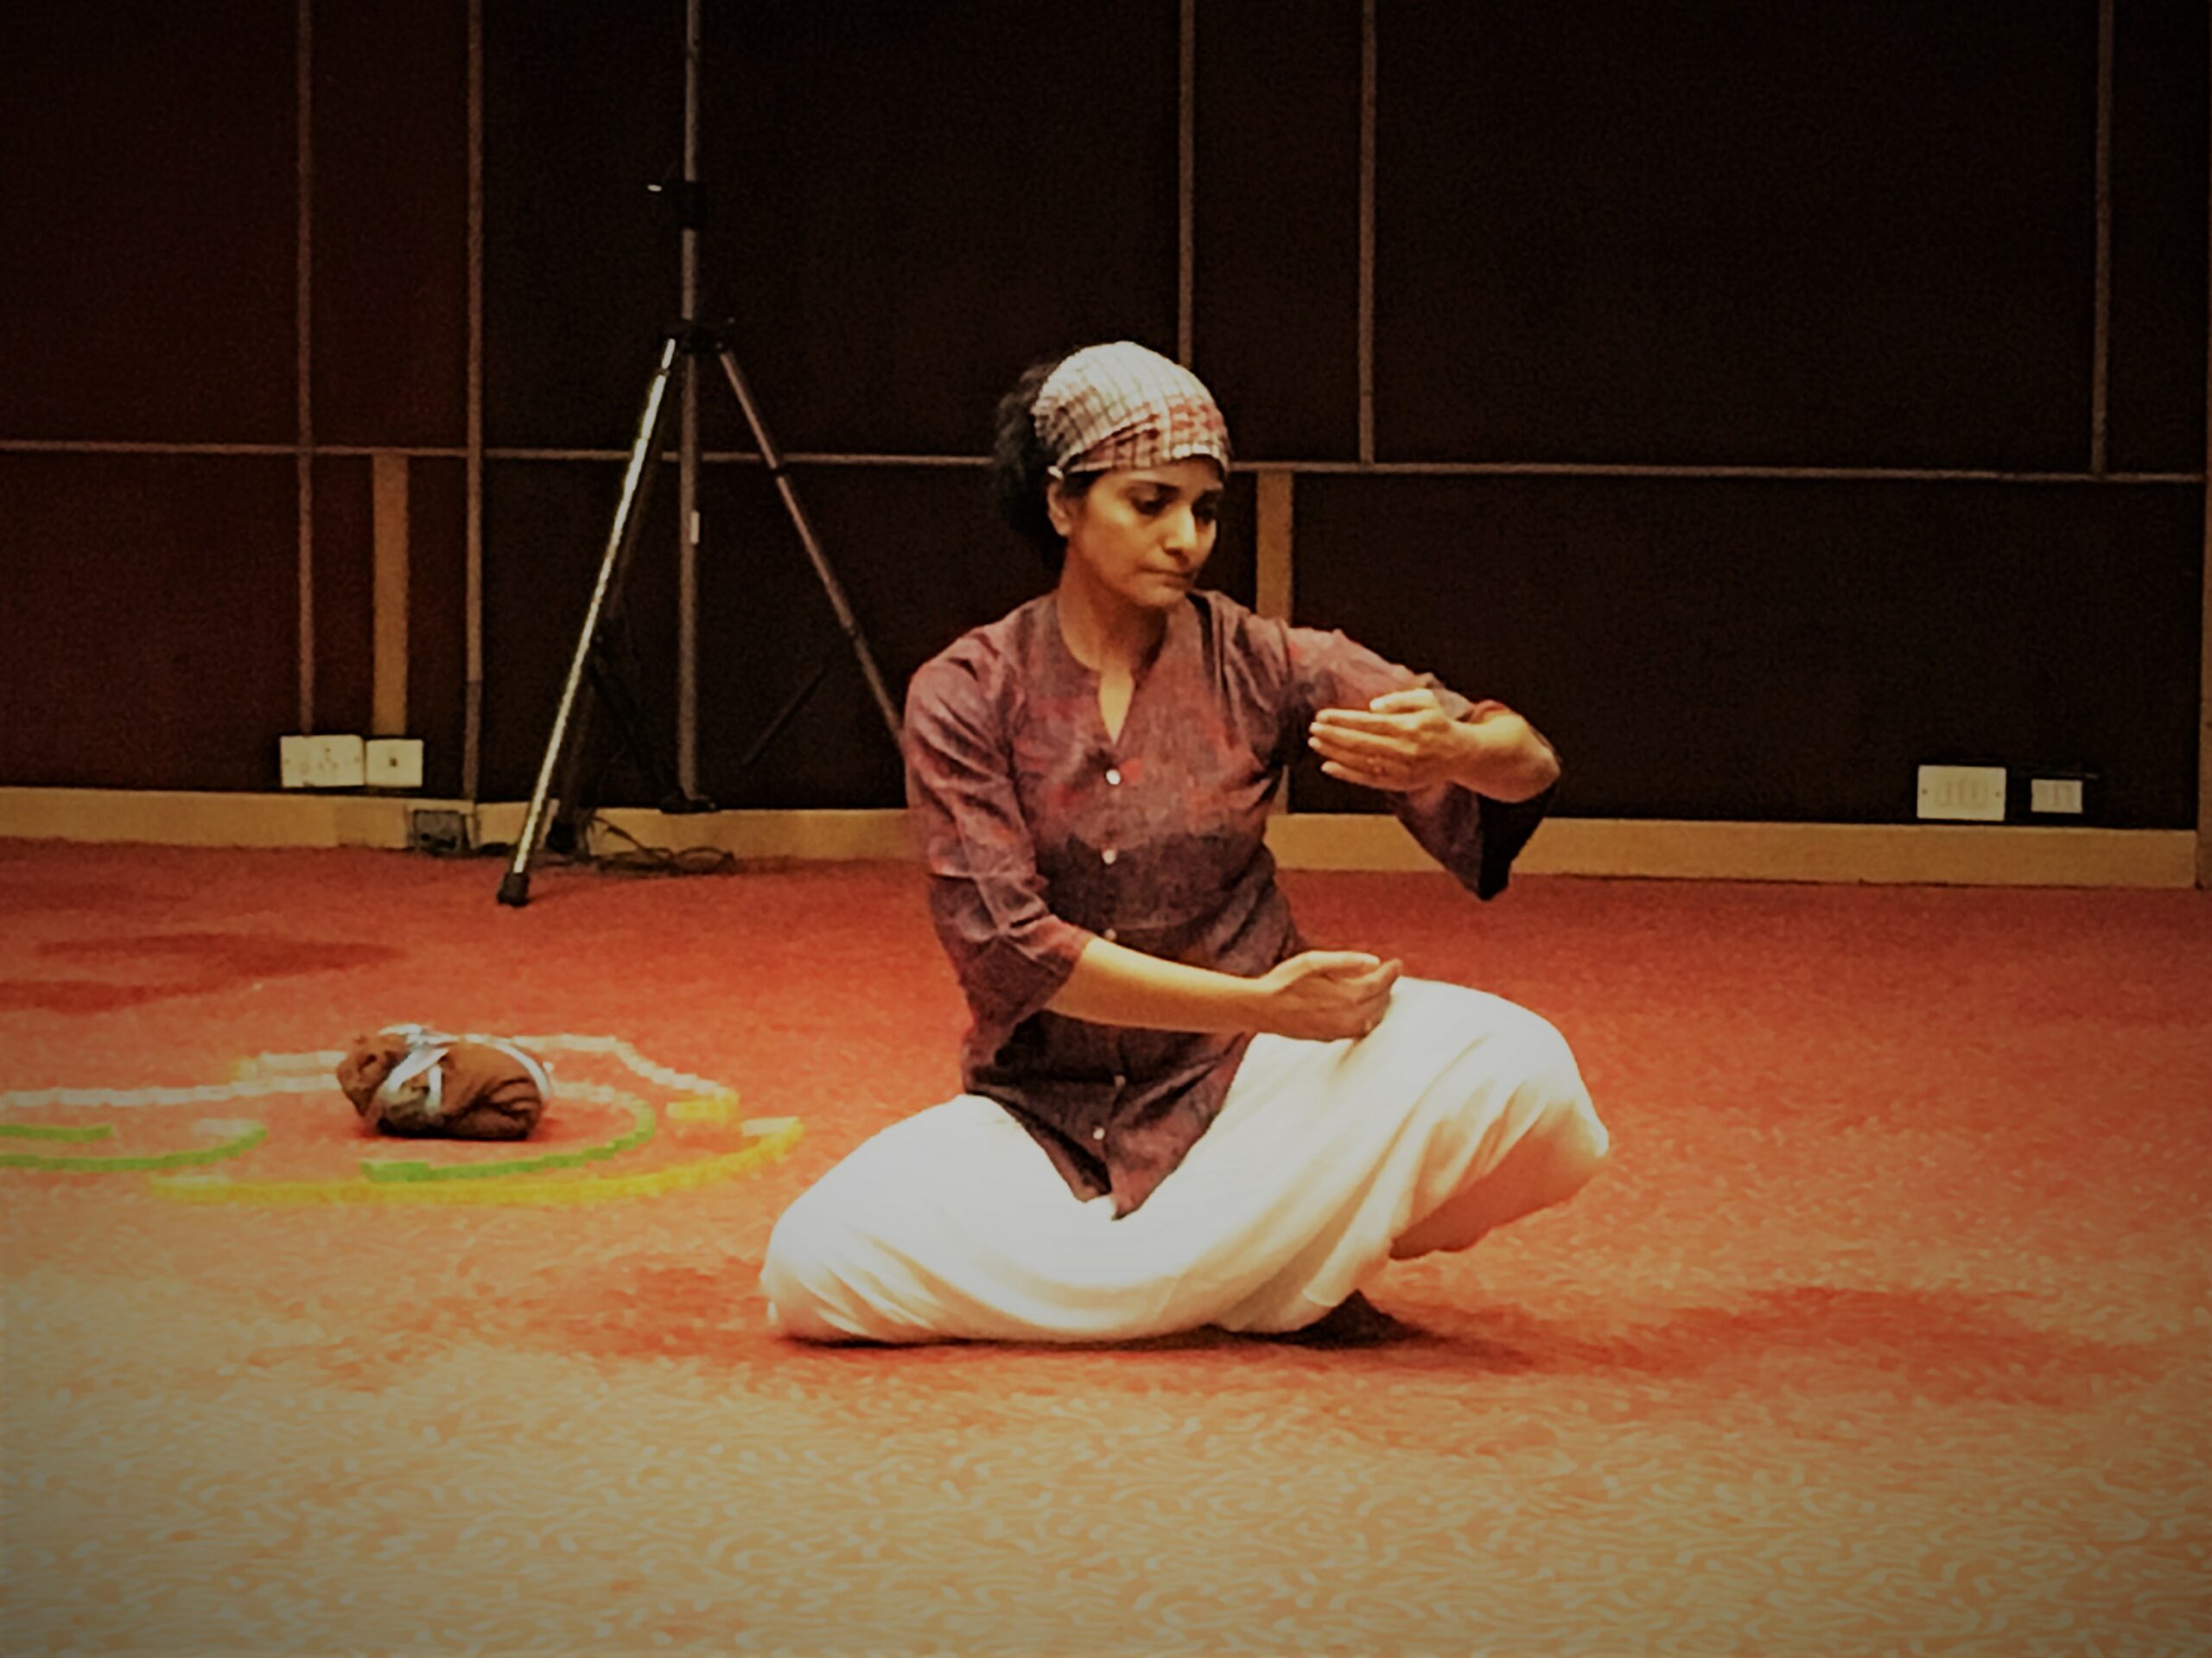 A woman sits cross legged on the floor. She is wearing white bottoms and an orange top. Her hair is tied back in a short scarf. She holds her arms out in front of her in a graceful dance move. She looks down to her fingertips. Her eyes are lowered. The carpet underneath her is an orange colour and behind her is dark wood paneling.